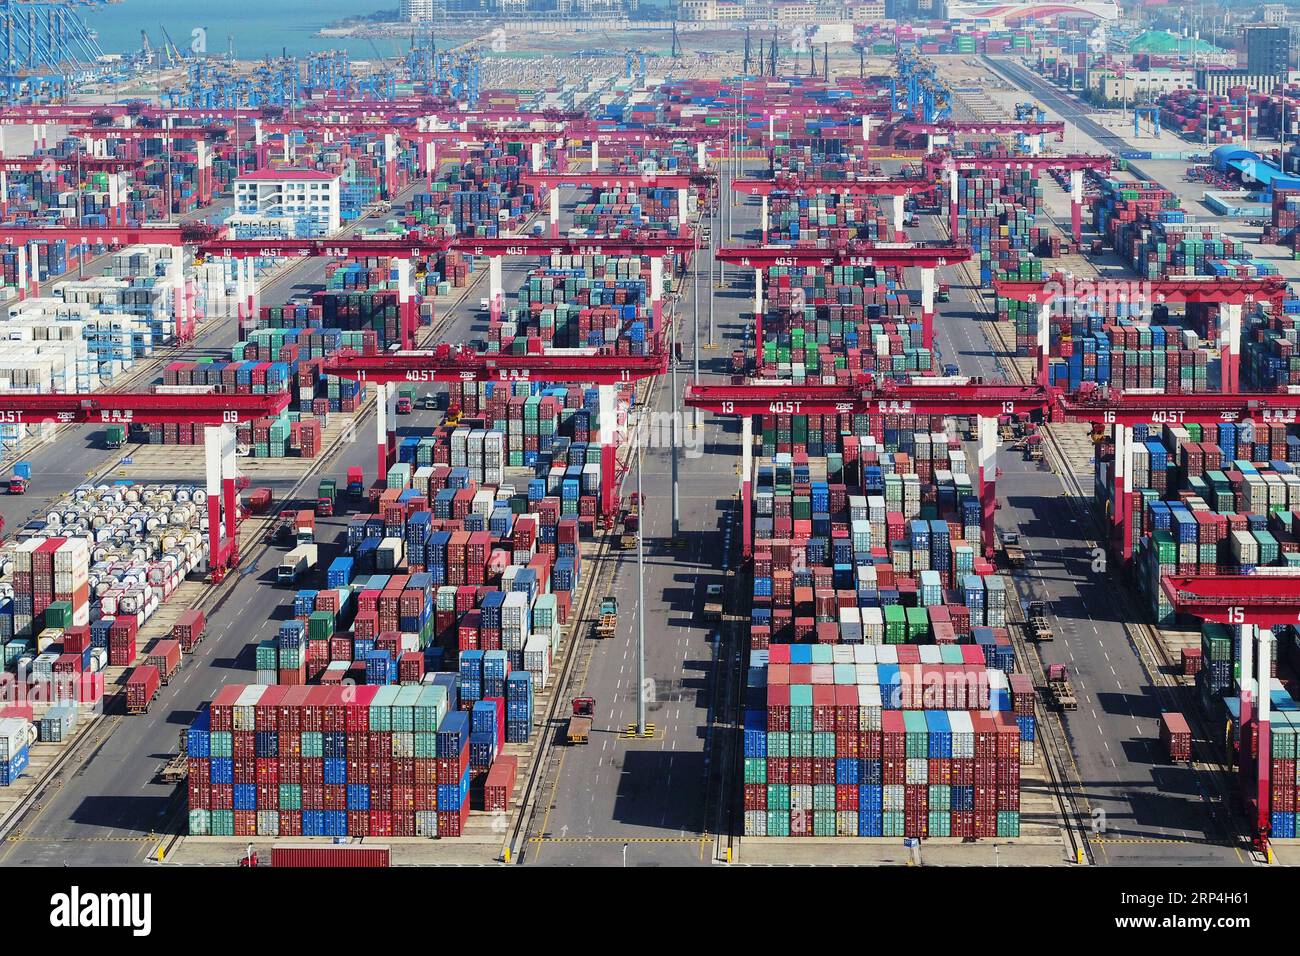 (181108) -- QINGDAO, Nov. 8, 2018 -- Aerial photo taken on Nov. 8, 2018 shows the container terminal of Port of Qingdao, east China s Shandong Province. For the first 10 months of 2018, China s foreign trade totaled 25.05 trillion yuan (3.614 trillion U.S. dollars), up 11.3 percent year on year, with export up 7.9 percent, hitting 13.35 trillion yuan (1.926 trillion dollars), and import up 15.5 percent, hitting 11.7 trillion yuan (1.69 trillion dollars) year on year respectively. ) (sxk) CHINA-TRADE-GROWTH (CN) YuxFangping PUBLICATIONxNOTxINxCHN Stock Photo